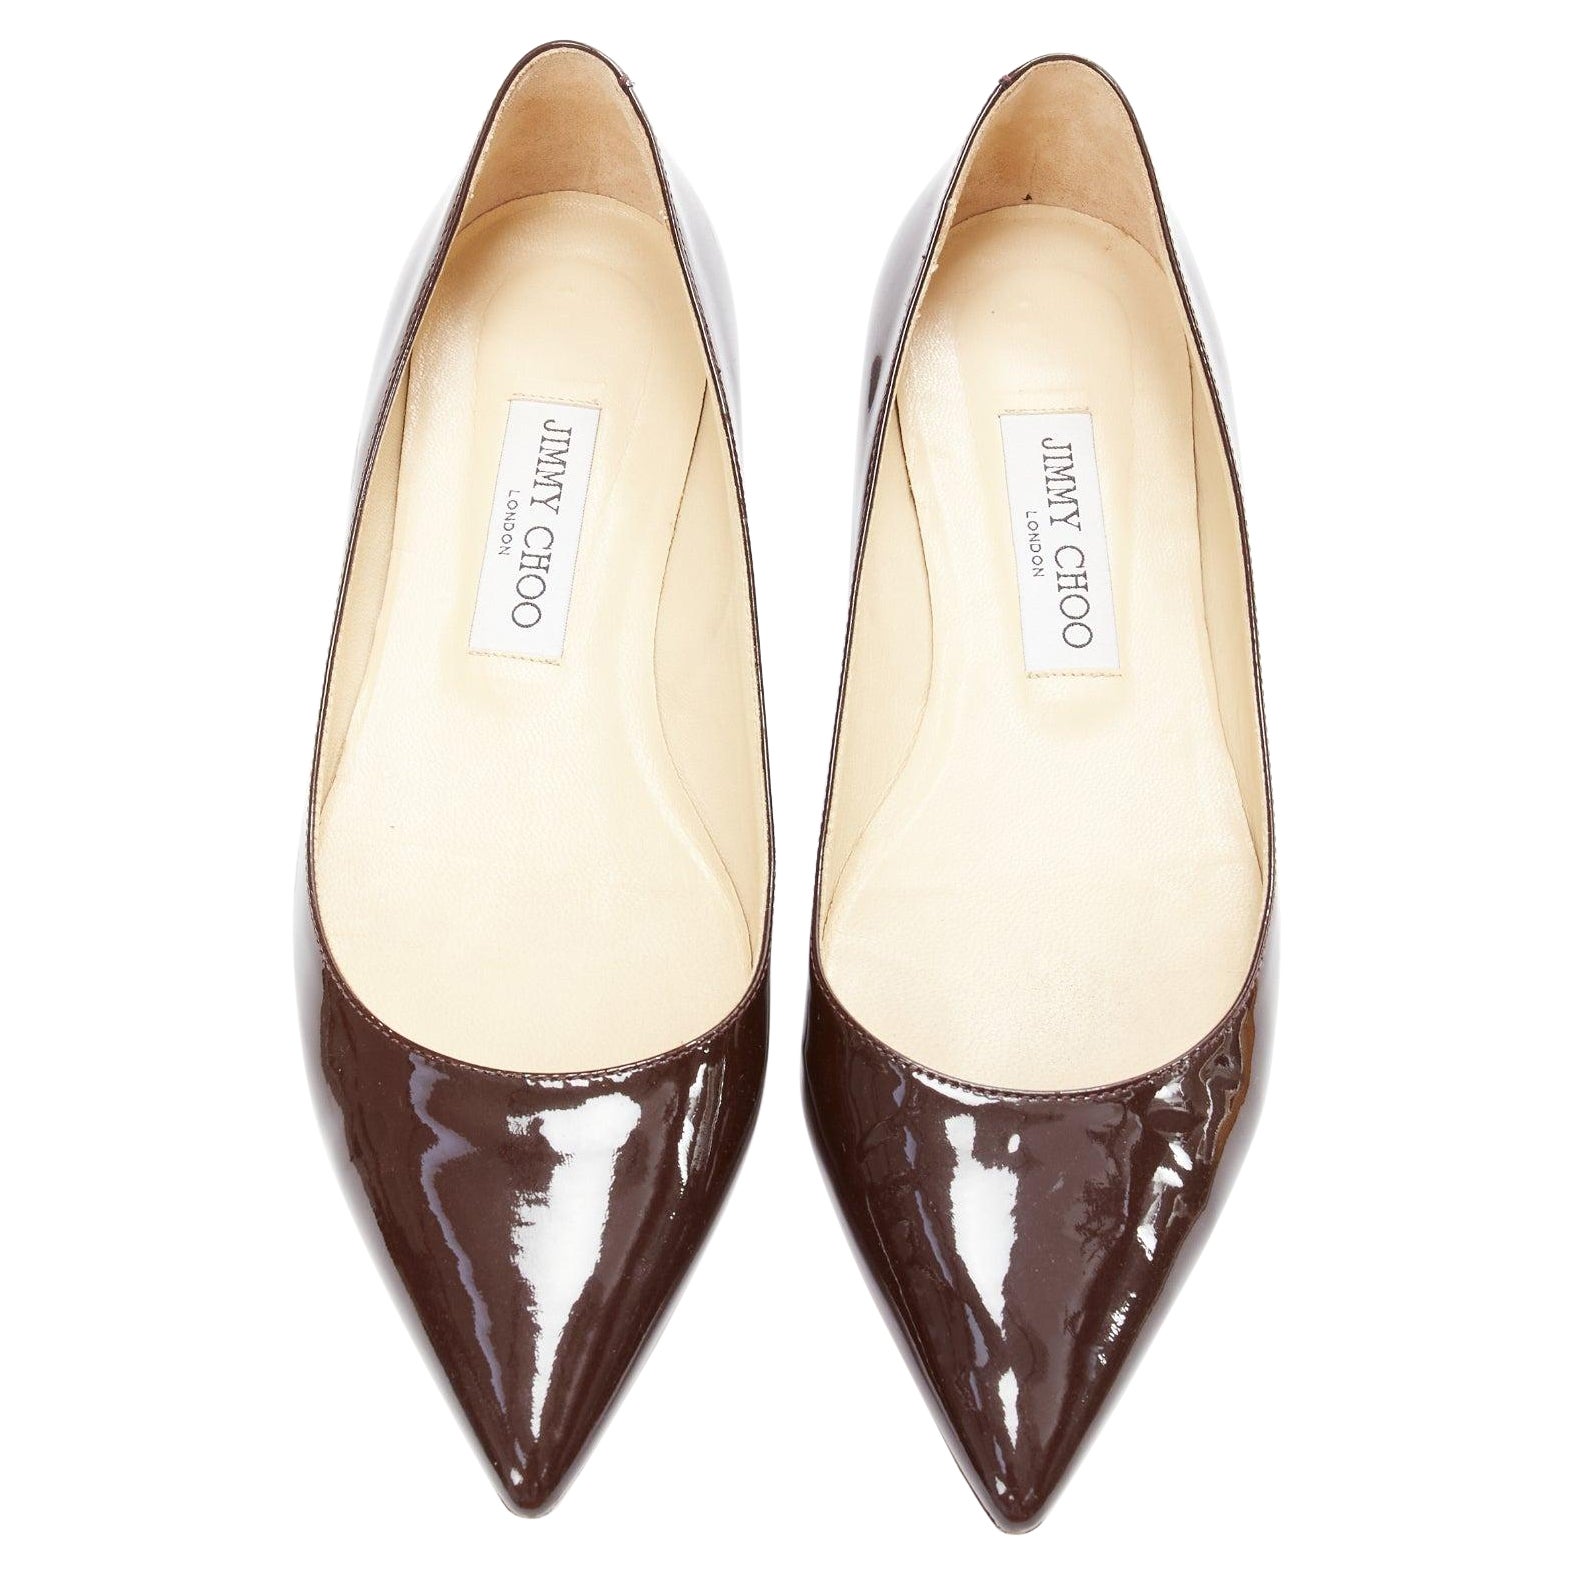 JIMMY CHOO brown patent leather pointed toe simple flats EU37.5